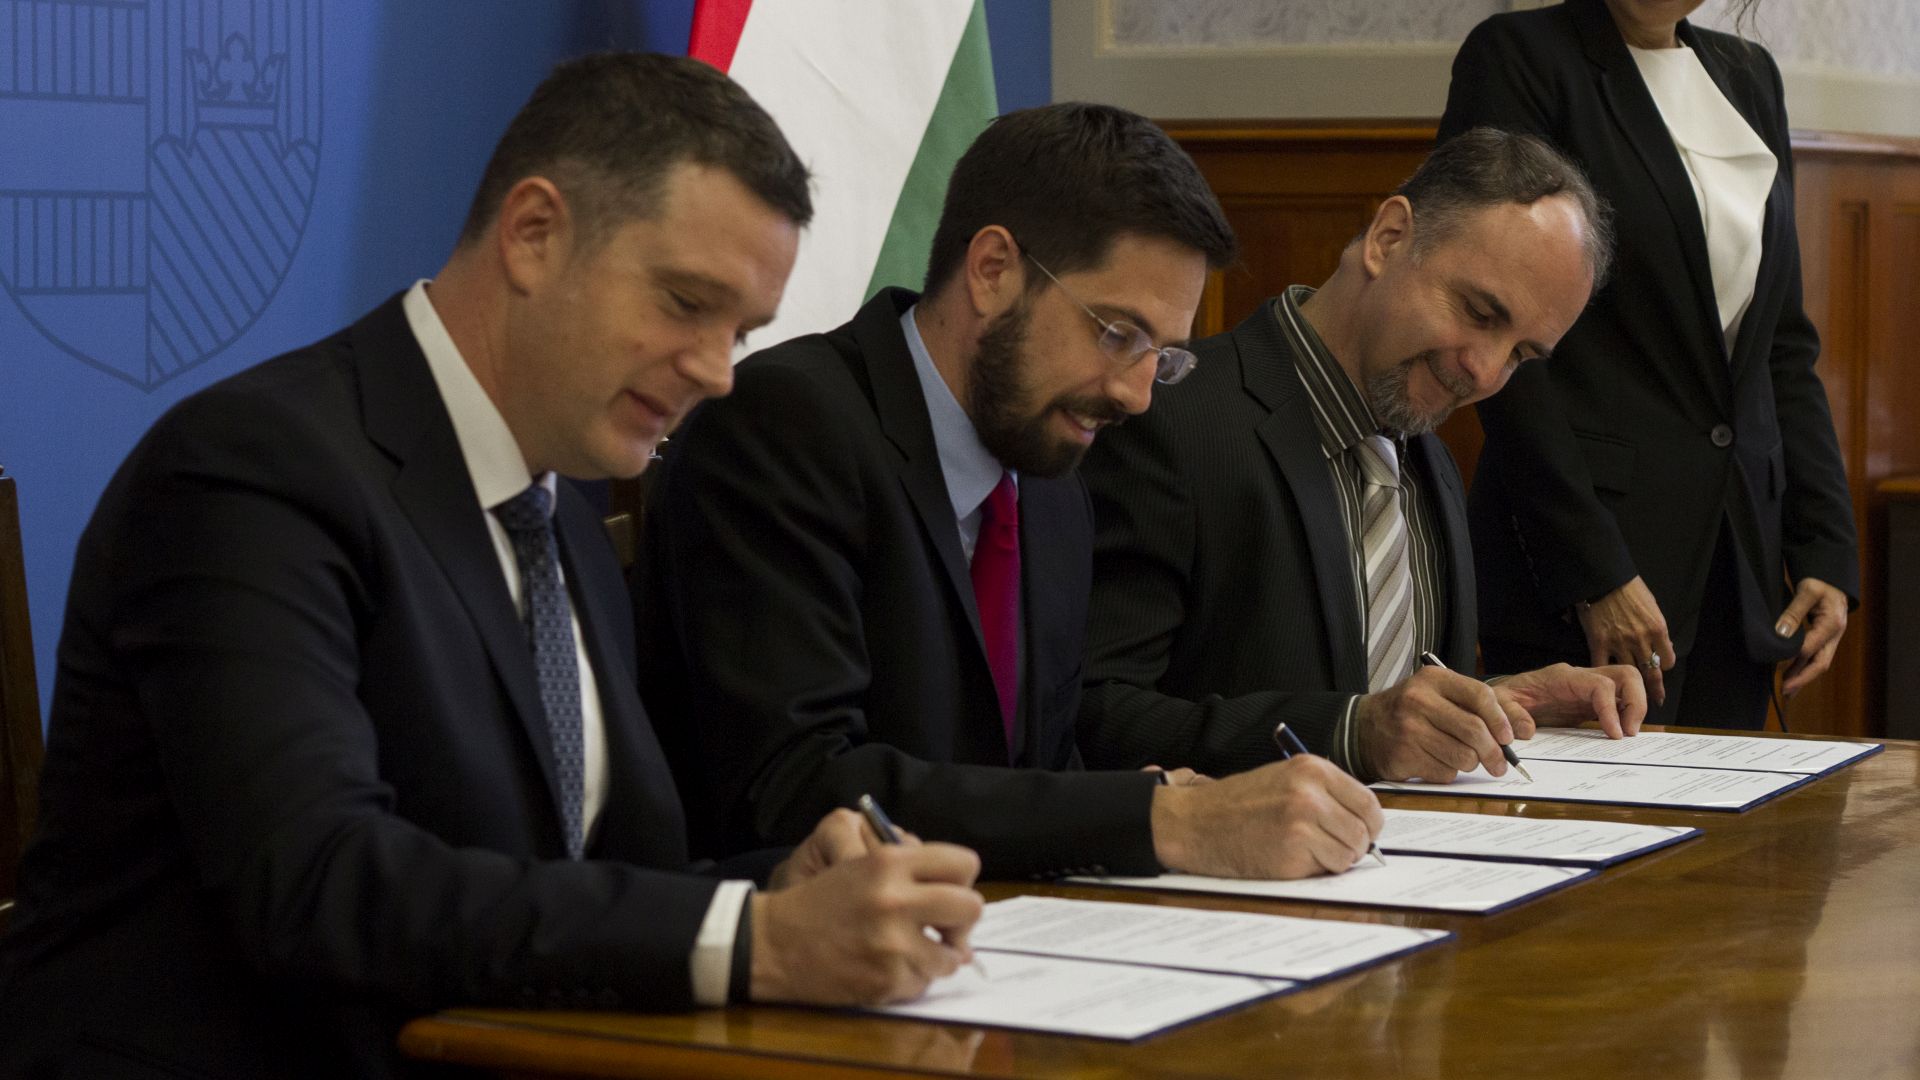 Signing the strategic partnership agreement at the Ministry of Foreign Affairs and Trade